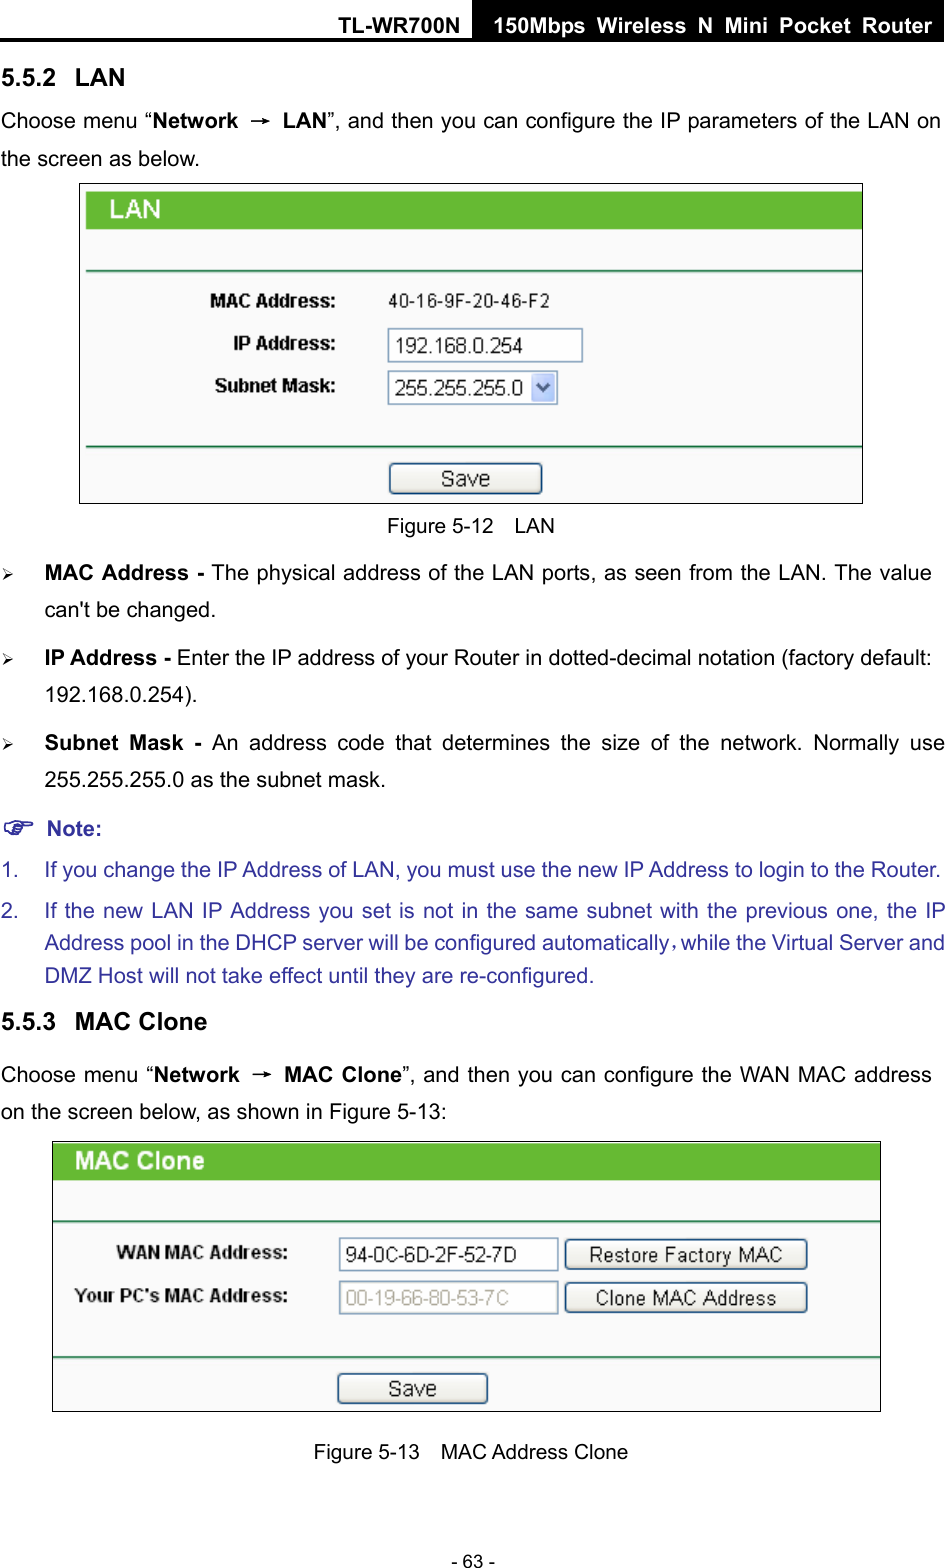 TL-WR700N 150Mbps Wireless N Mini Pocket Router - 63 - 5.5.2  LAN Choose menu “Network  → LAN”, and then you can configure the IP parameters of the LAN on the screen as below.  Figure 5-12  LAN ¾ MAC Address - The physical address of the LAN ports, as seen from the LAN. The value can&apos;t be changed. ¾ IP Address - Enter the IP address of your Router in dotted-decimal notation (factory default: 192.168.0.254). ¾ Subnet Mask - An address code that determines the size of the network. Normally use 255.255.255.0 as the subnet mask.   ) Note: 1.  If you change the IP Address of LAN, you must use the new IP Address to login to the Router.   2.  If the new LAN IP Address you set is not in the same subnet with the previous one, the IP Address pool in the DHCP server will be configured automatically，while the Virtual Server and DMZ Host will not take effect until they are re-configured. 5.5.3  MAC Clone Choose menu “Network  → MAC Clone”, and then you can configure the WAN MAC address on the screen below, as shown in Figure 5-13:  Figure 5-13  MAC Address Clone 